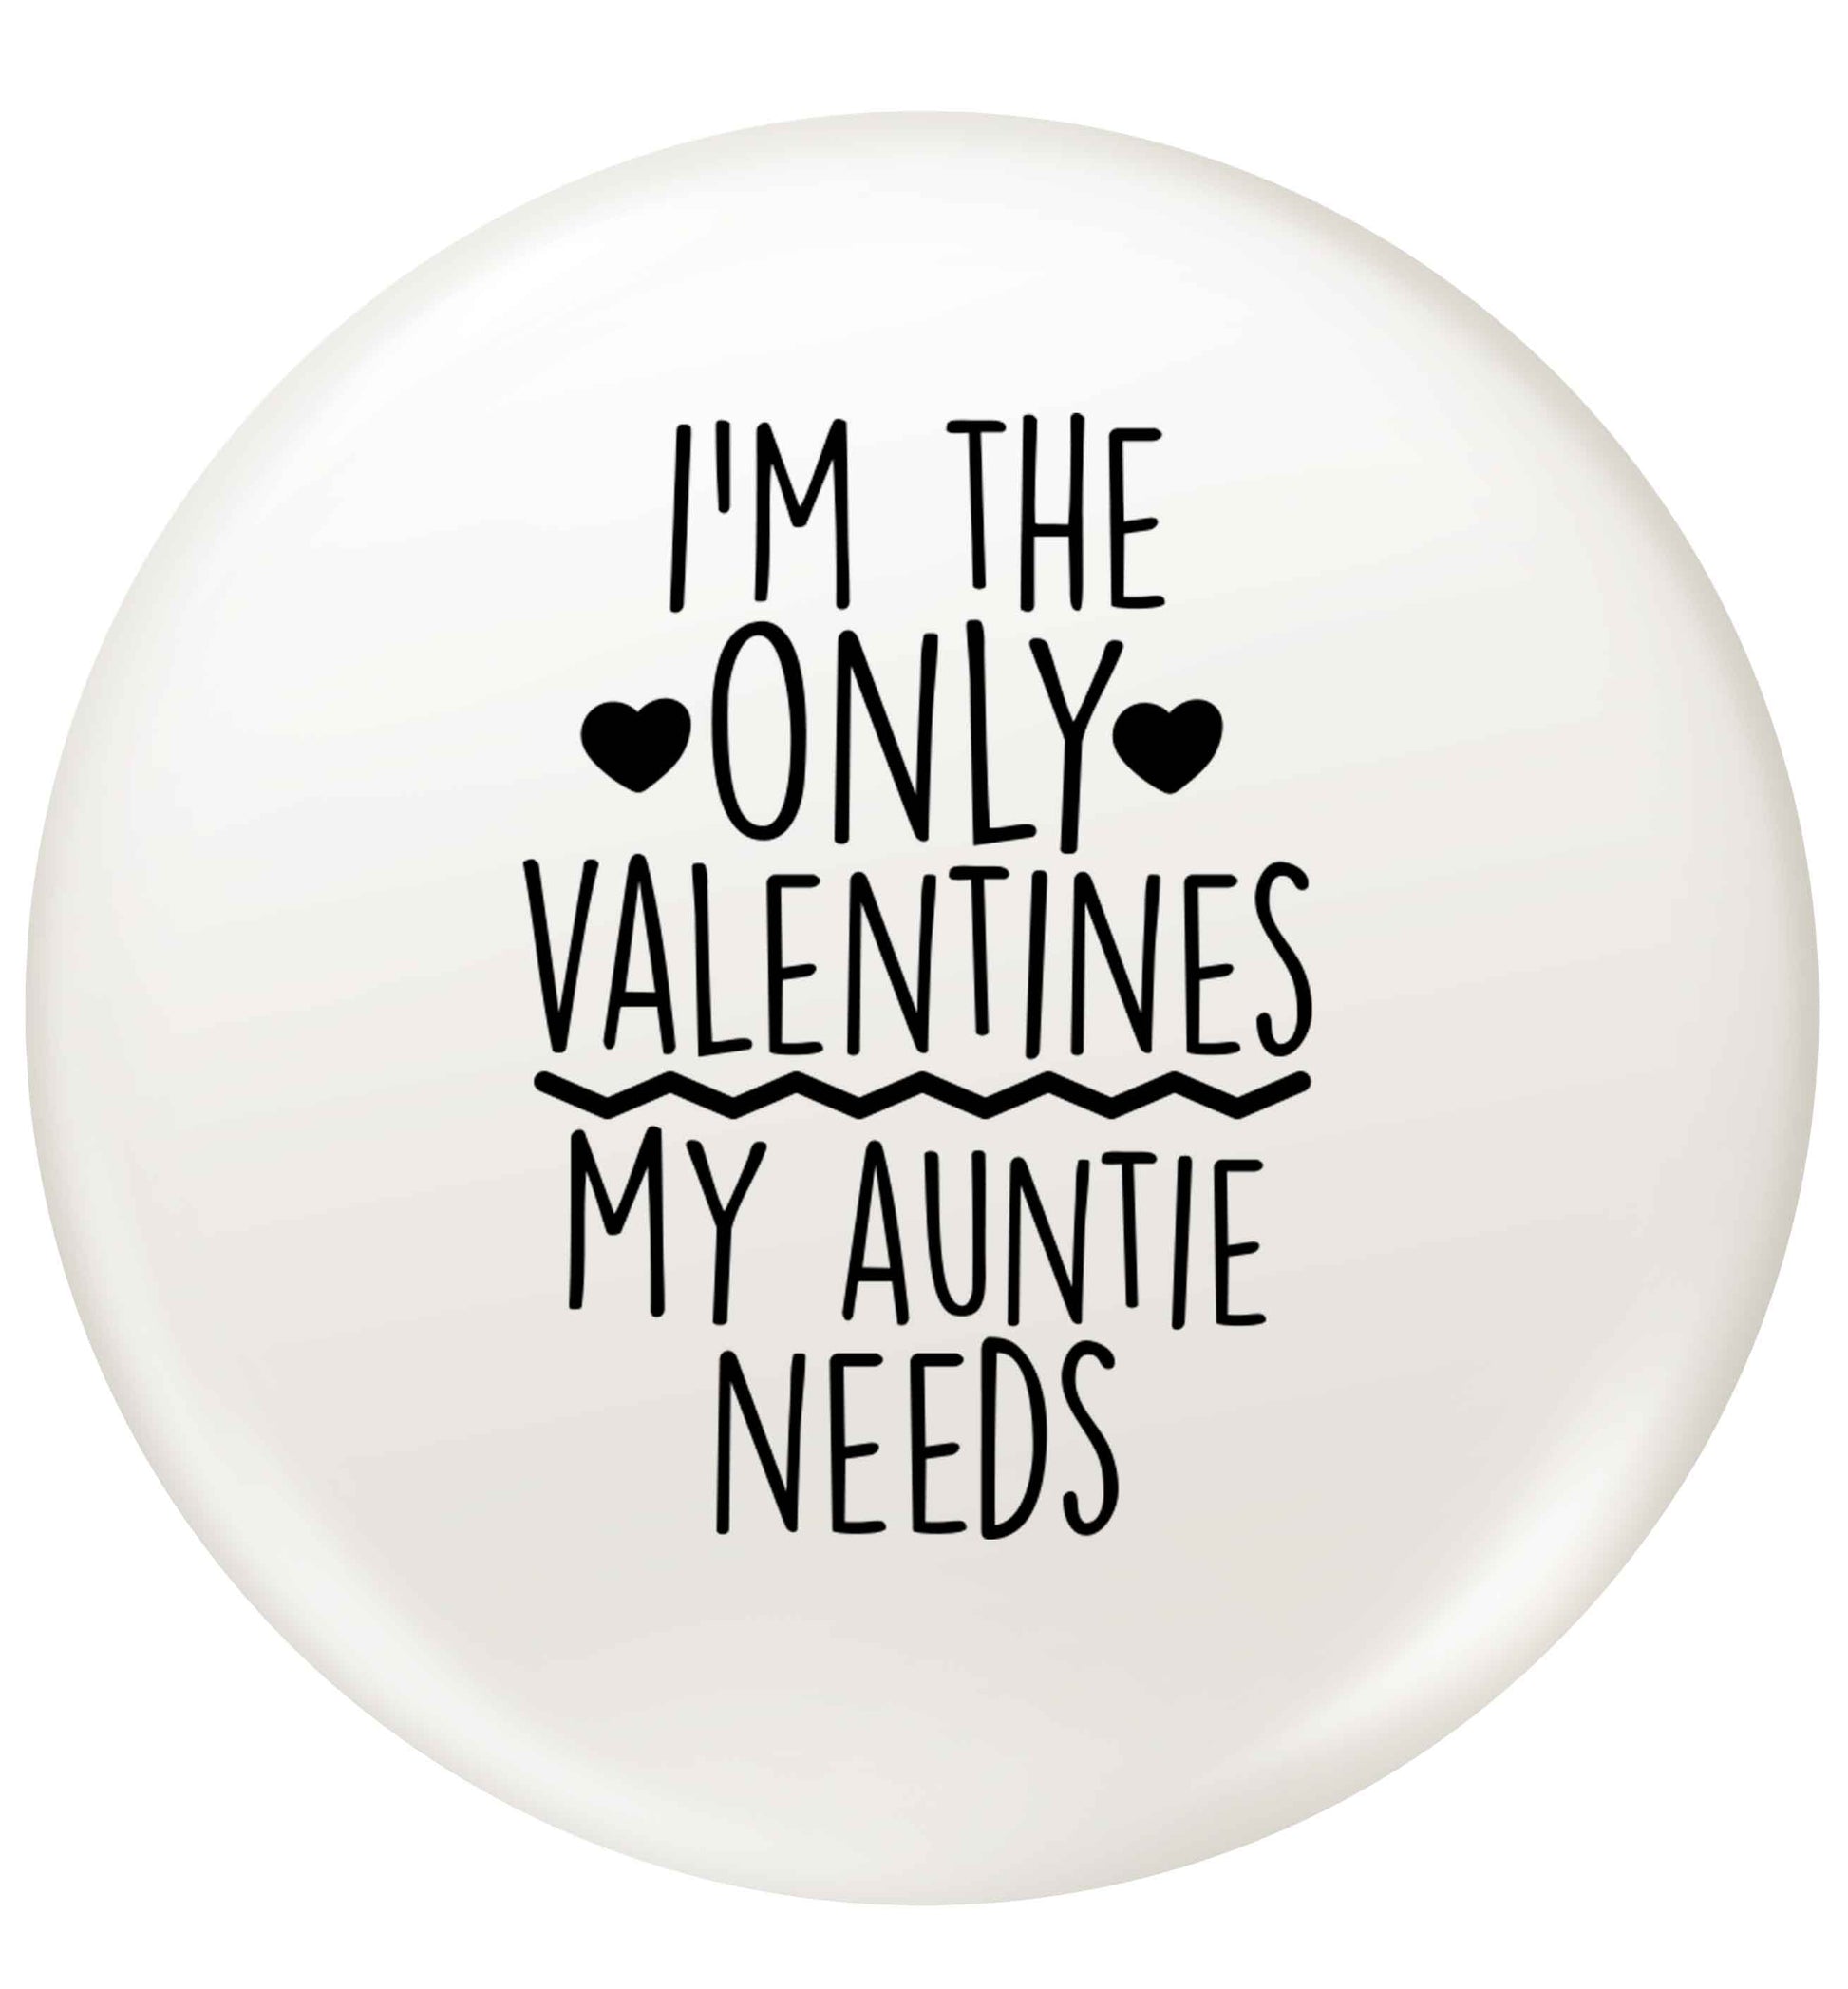 I'm the only valentines my auntie needs small 25mm Pin badge